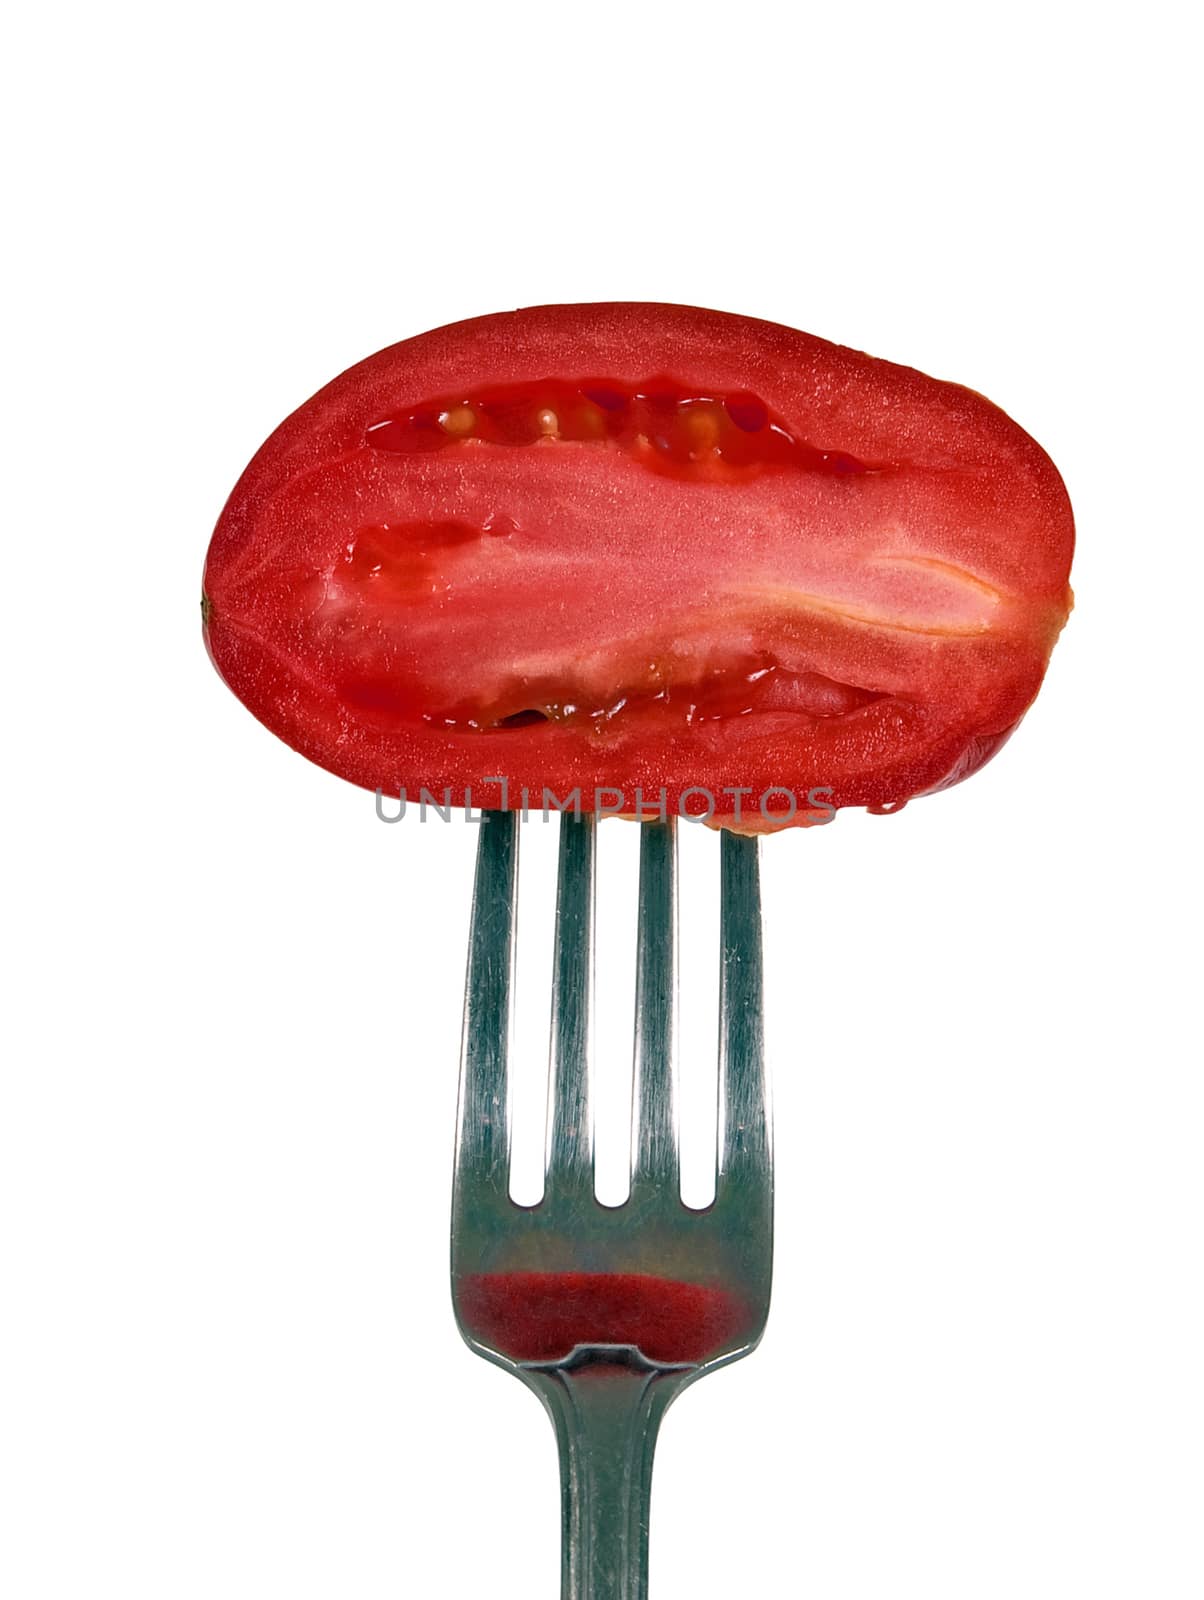 Tomato On Fork Isolated by stockbuster1